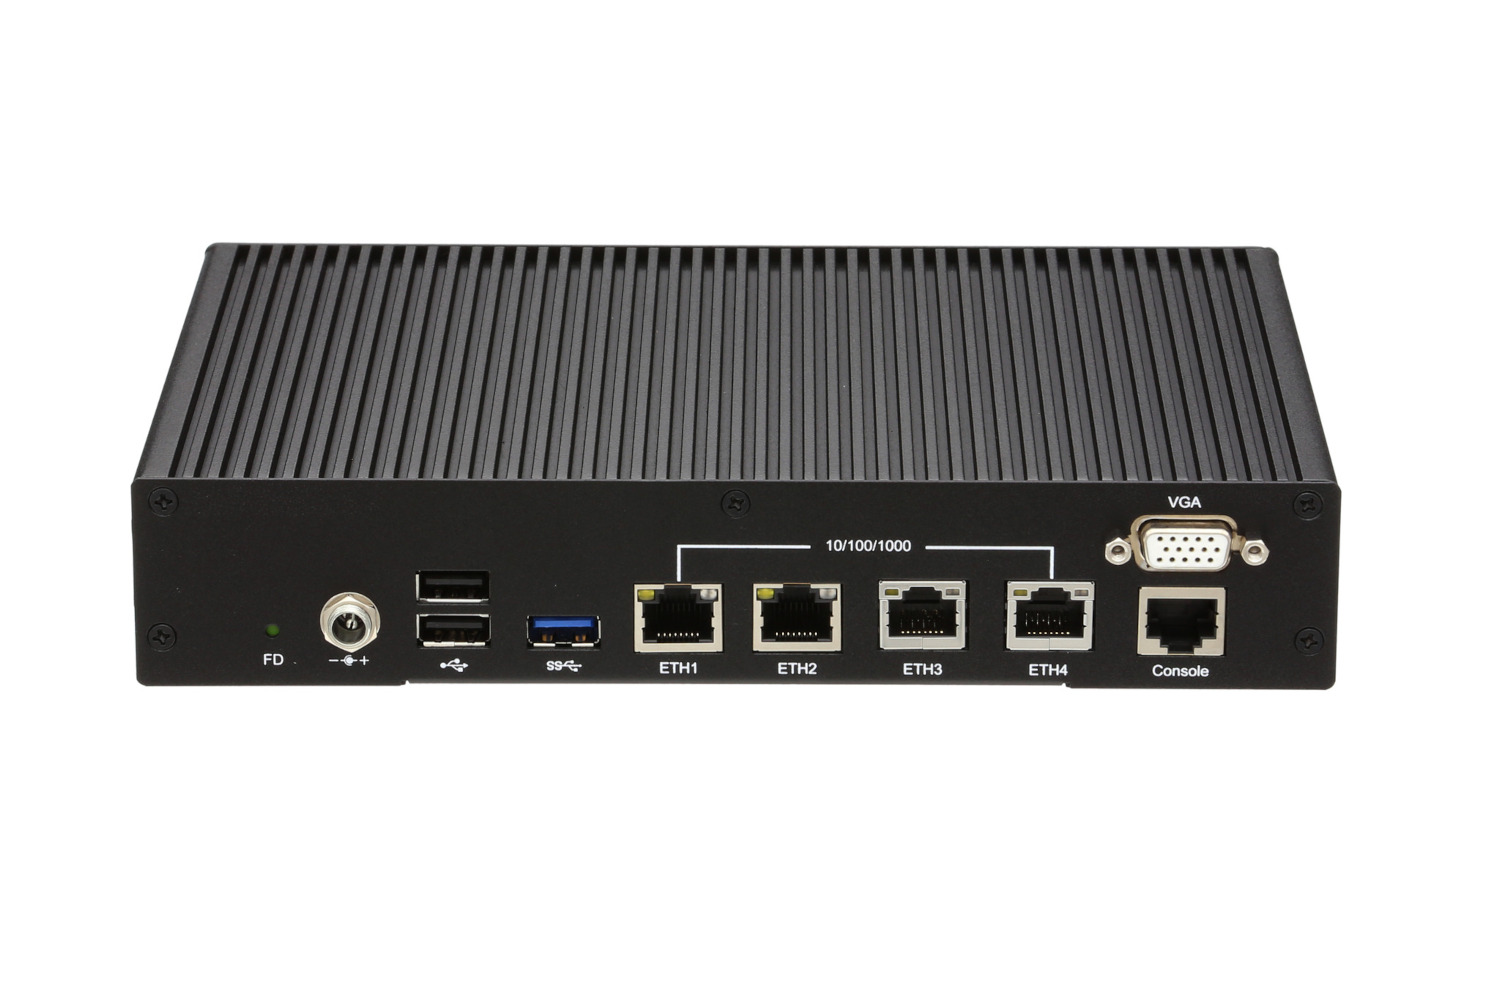 The TECH QUAD - a Mini-PC for network applications